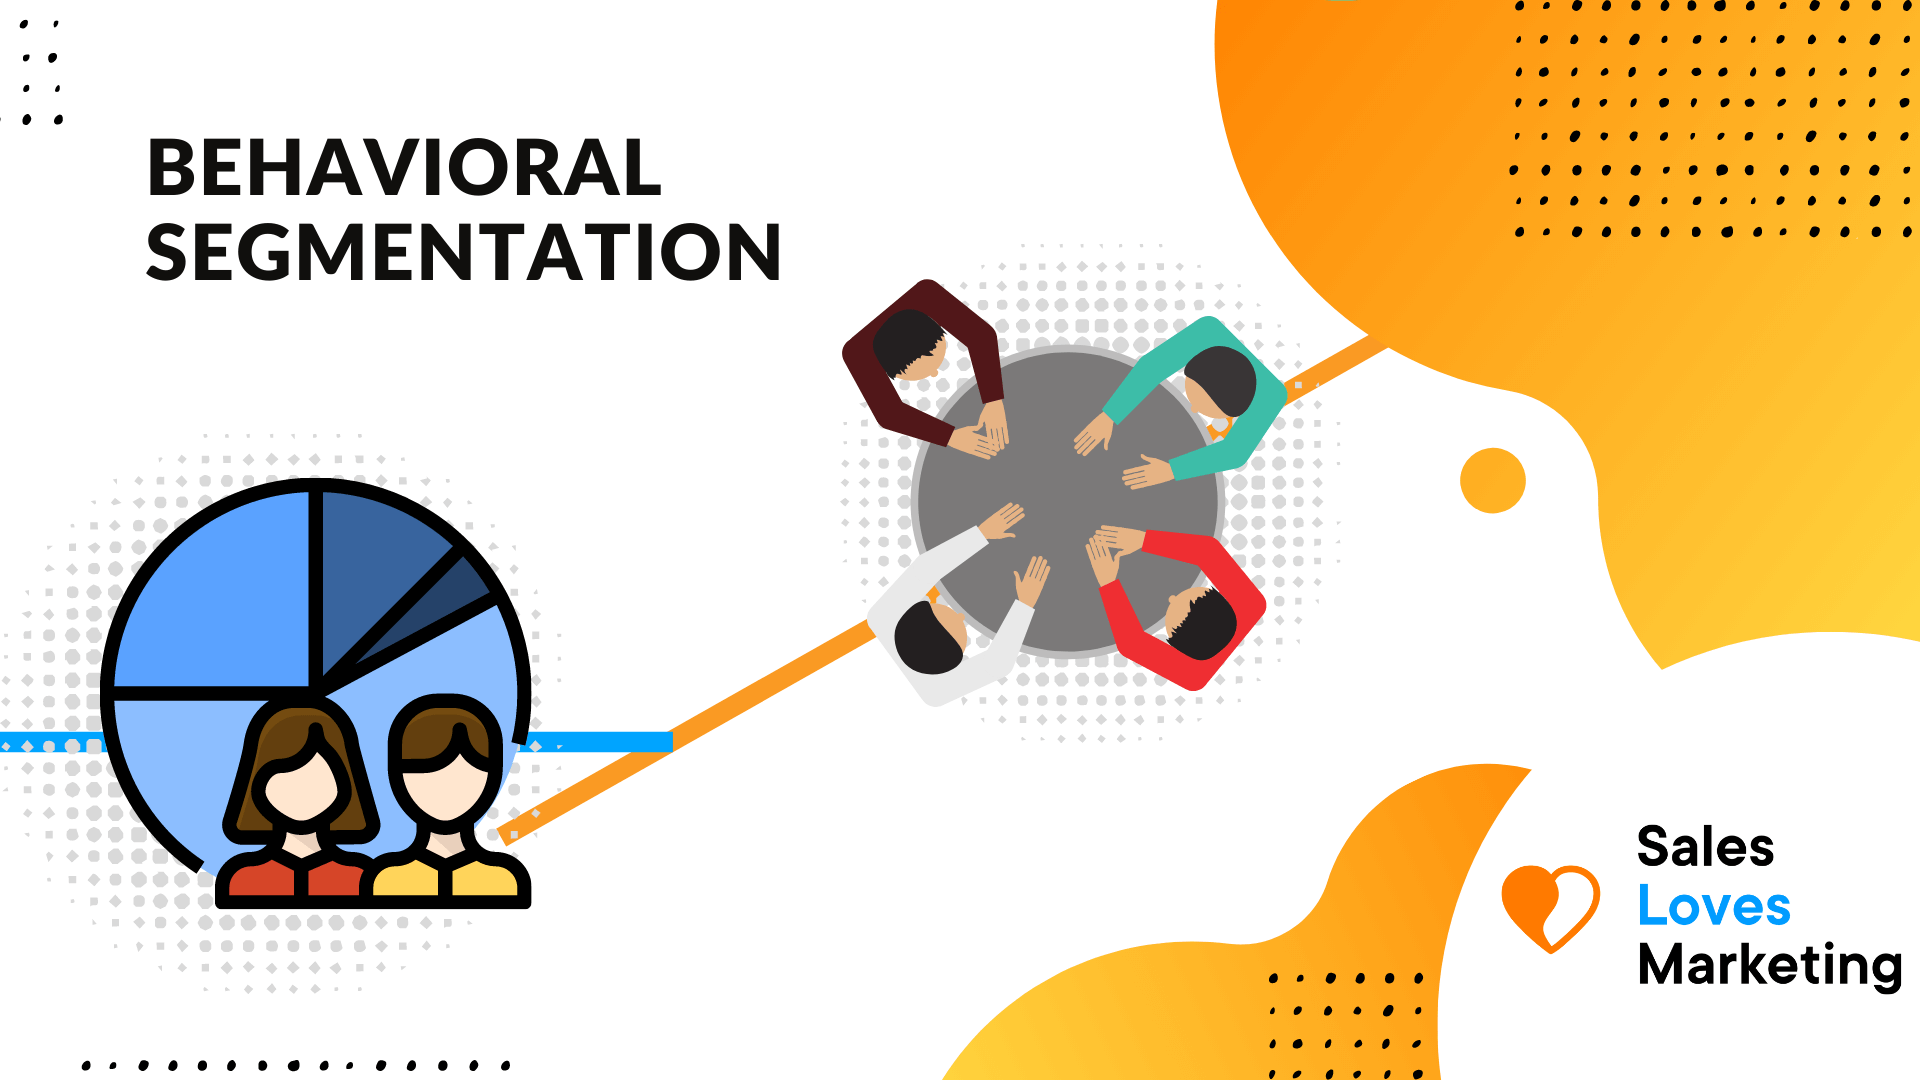 Behavioral Segmentation: What is it and Why It’s Important for Marketing